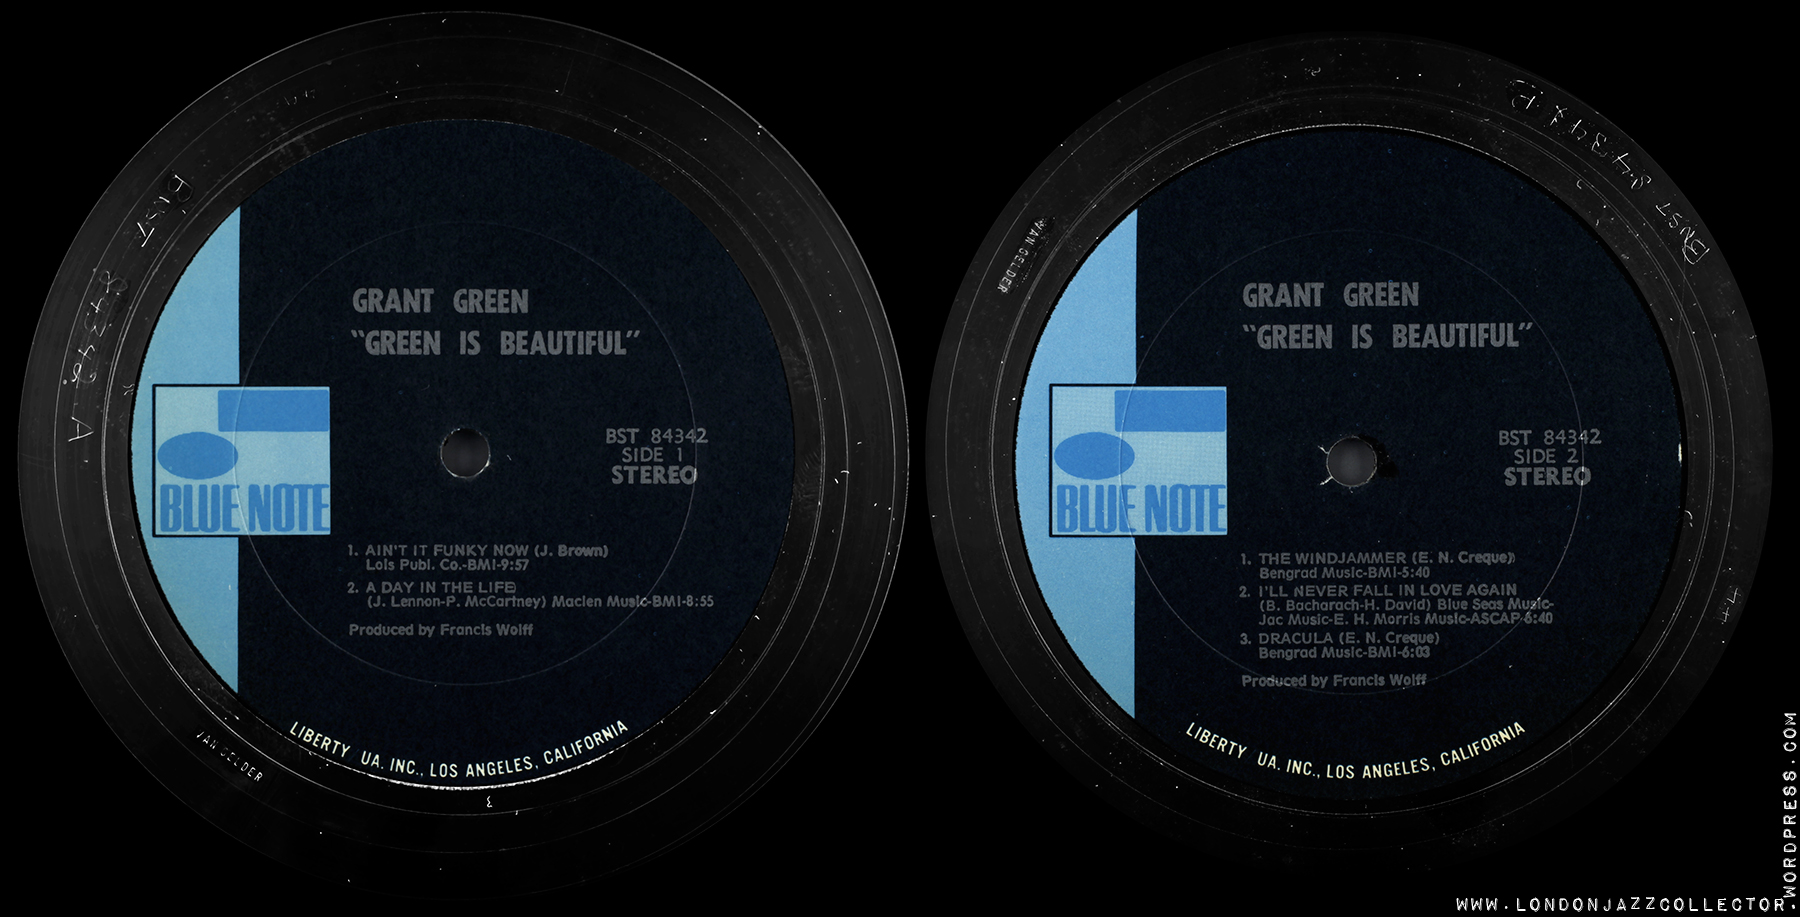 My Favourite Things”: Grant Green/